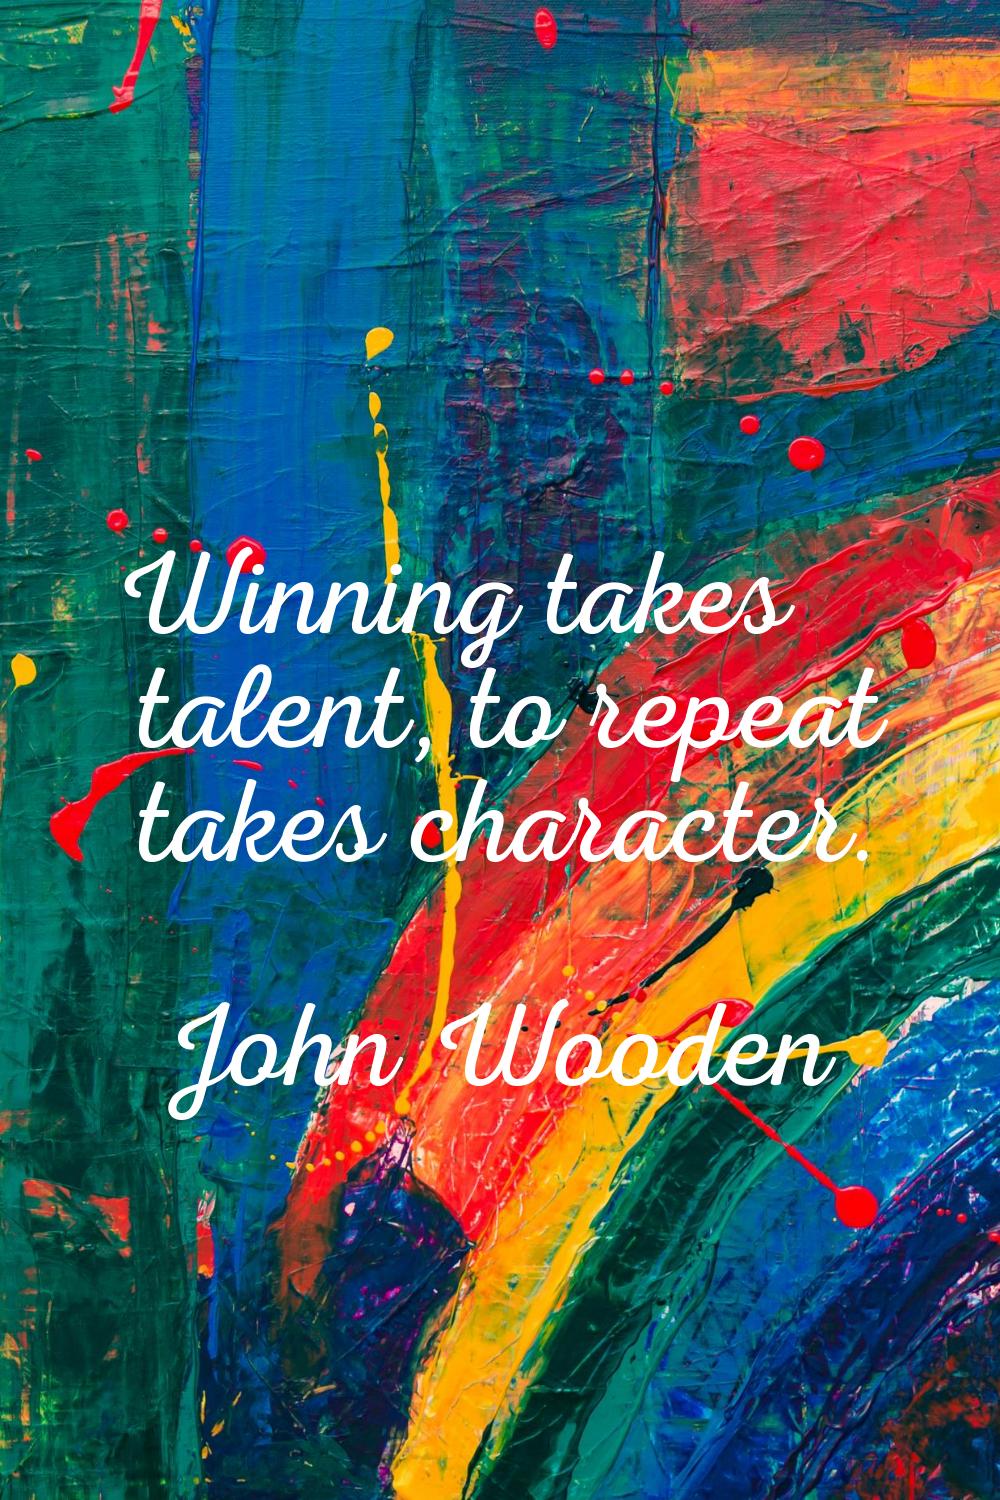 Winning takes talent, to repeat takes character.